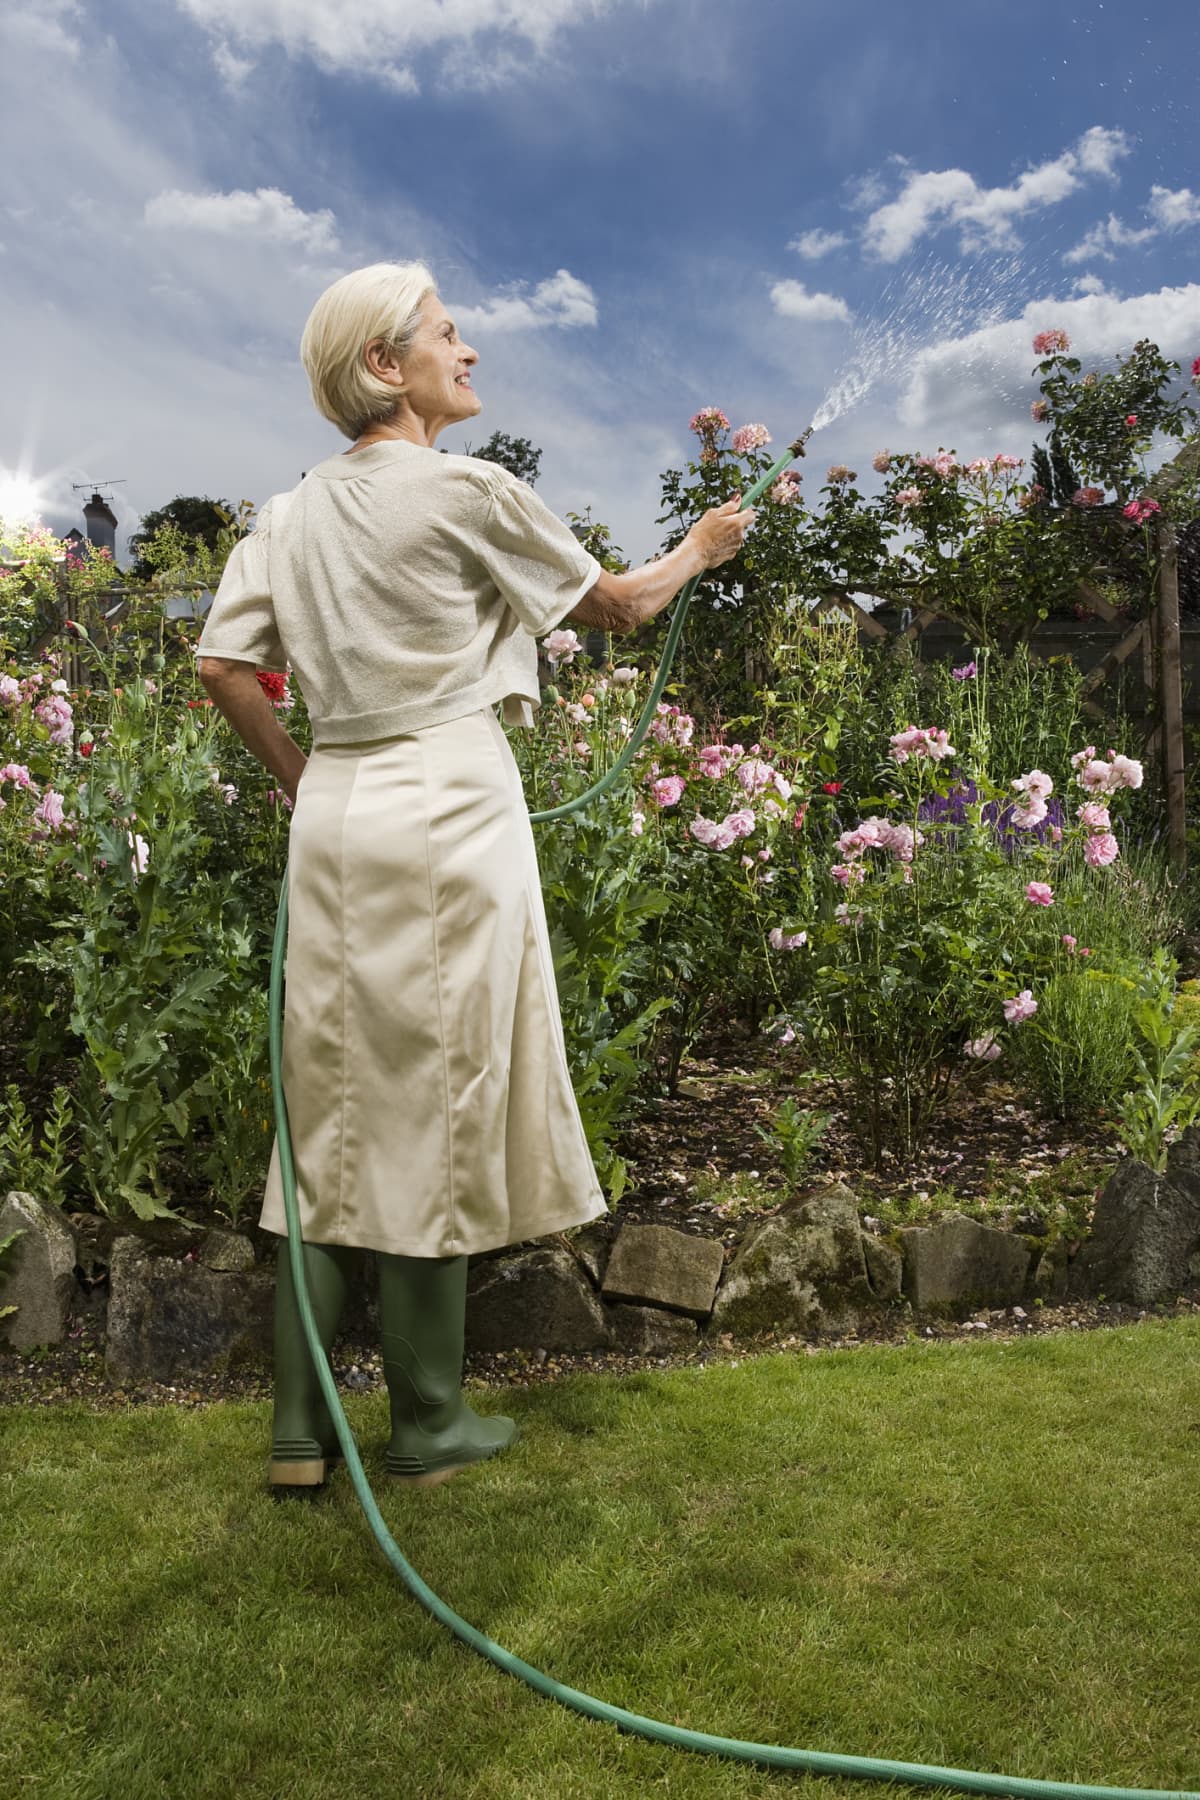 Woman watering flowers with hose